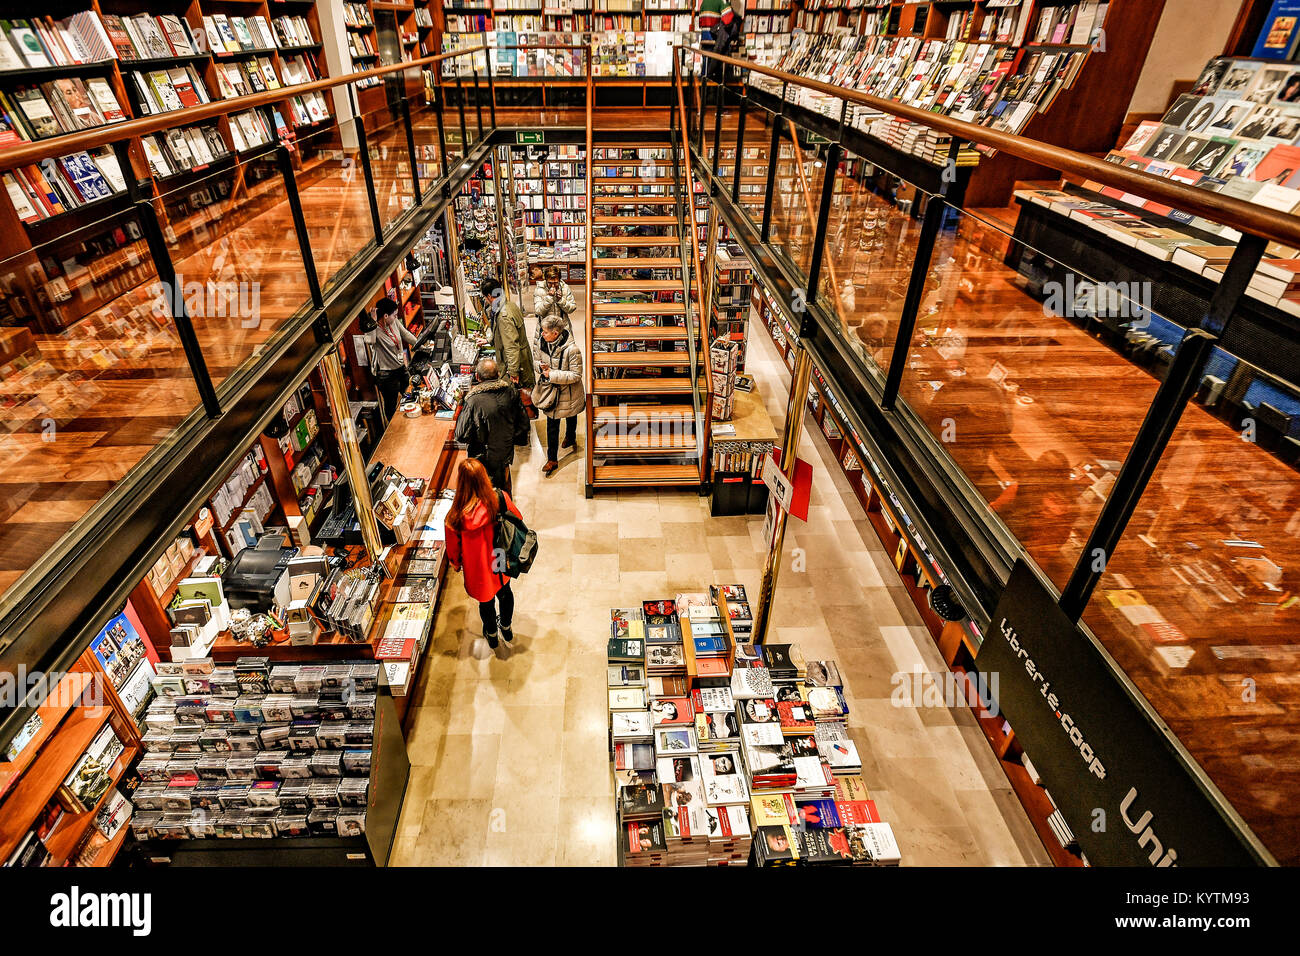 Libreria storica High Resolution Stock Photography and Images - Alamy